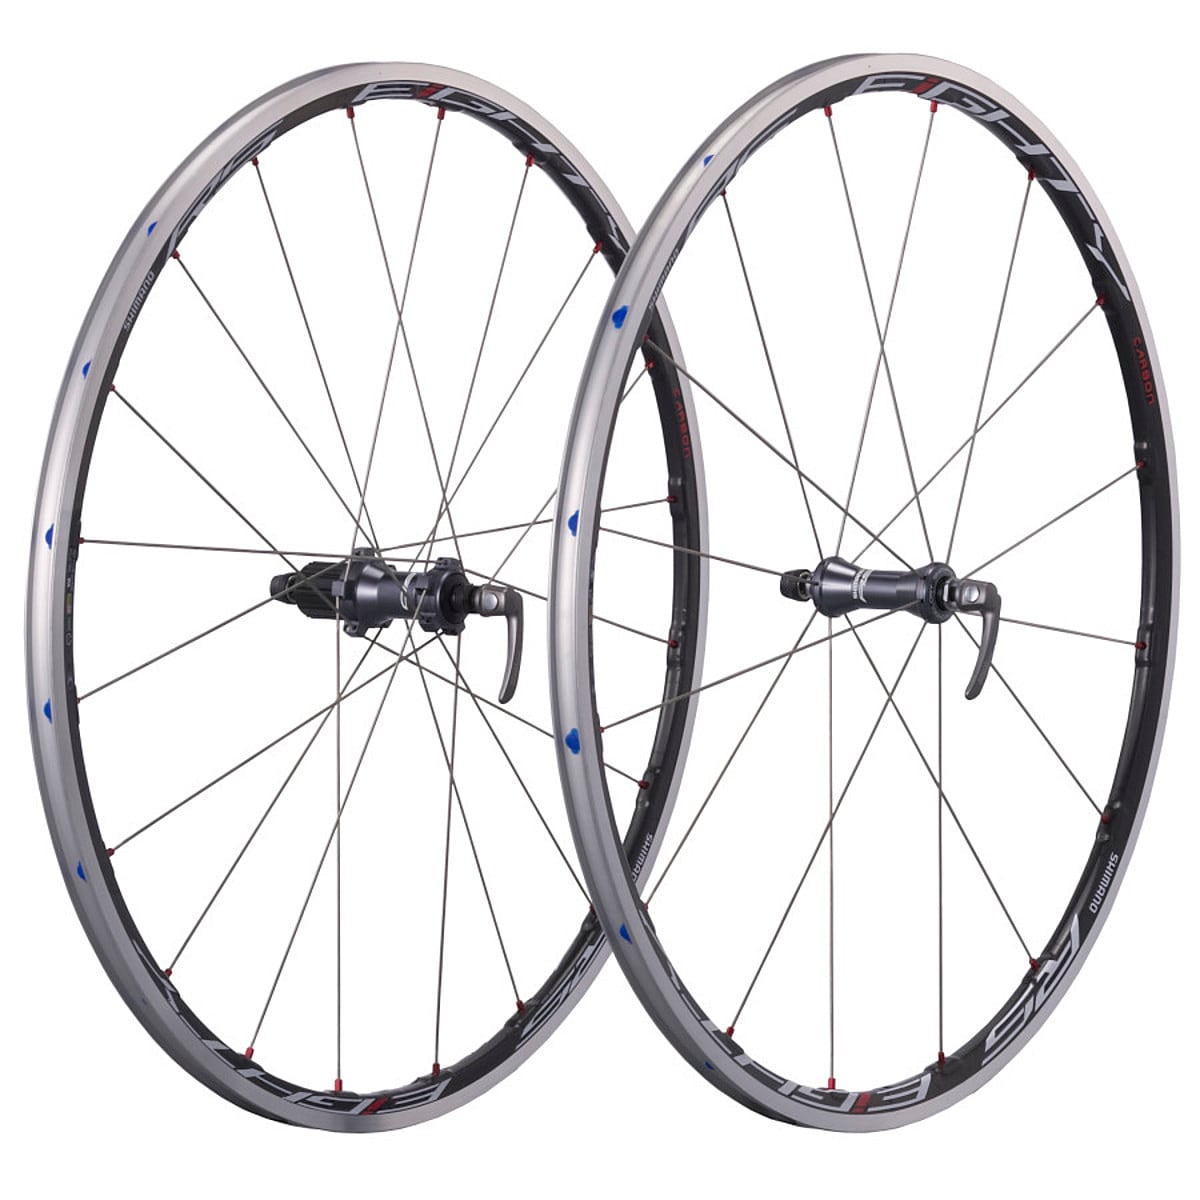 Shimano WH-RS80-C24 CL Wheelset - Clincher - Components